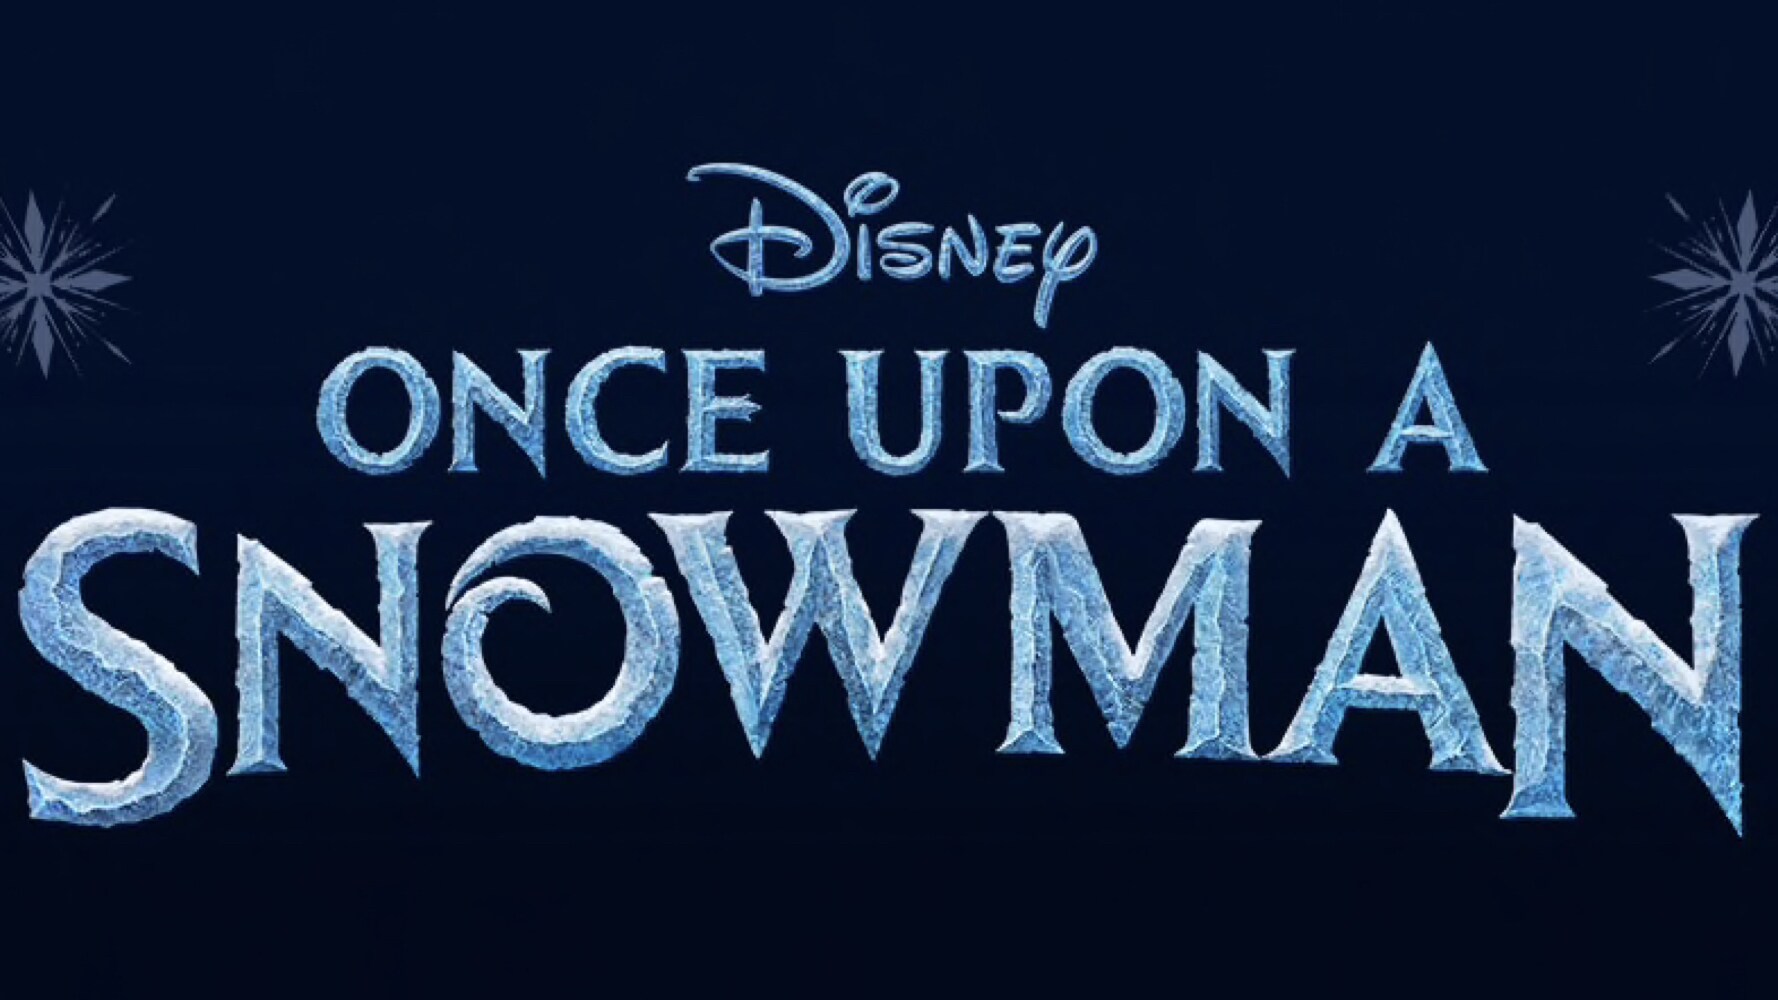 The Previously Untold Origins Of Olaf Are Revealed In The All-New Short “Once Upon A Snowman”